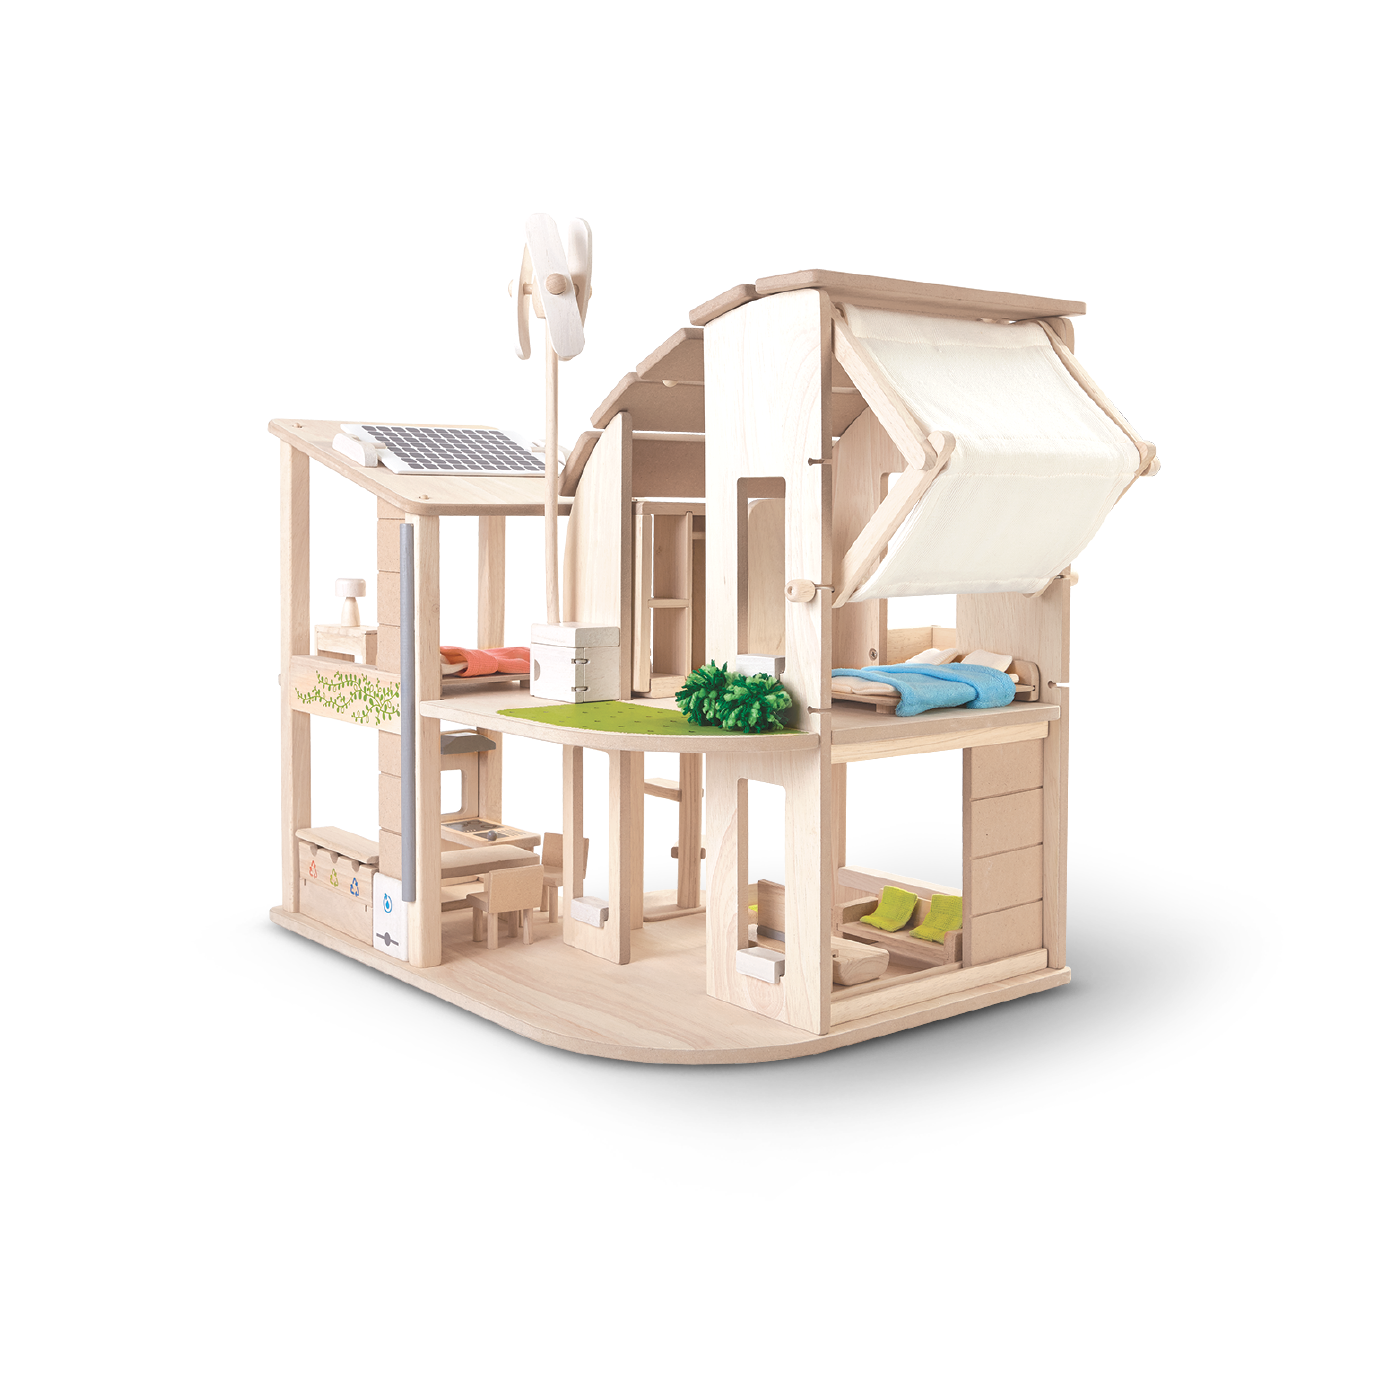 Green Dollhouse with Furniture